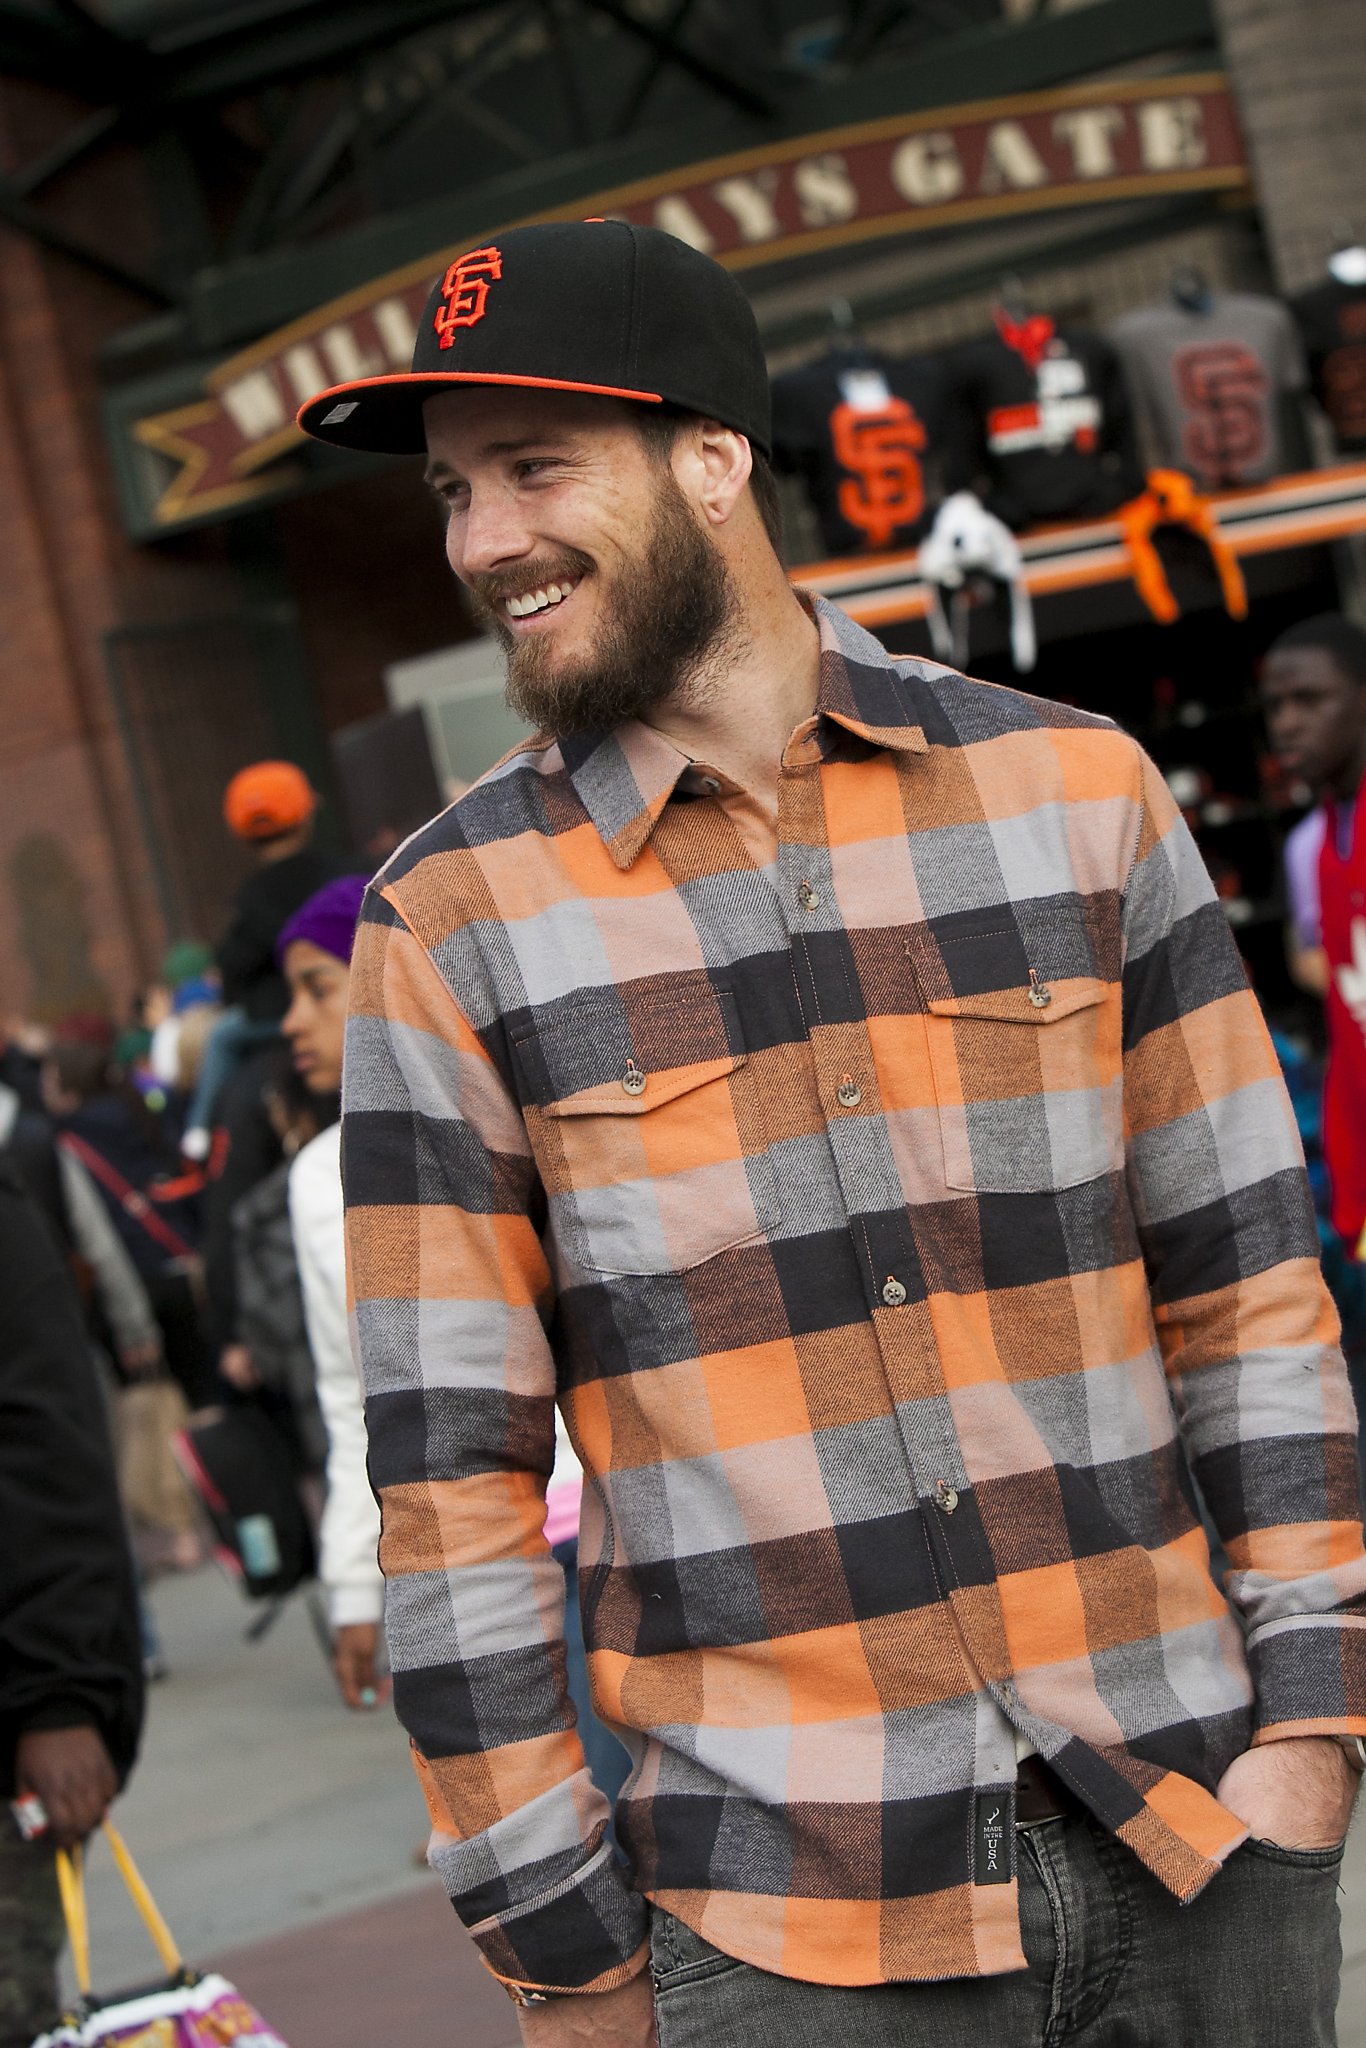 Pladra flannel shirts fit for the sportsman or the cuddler